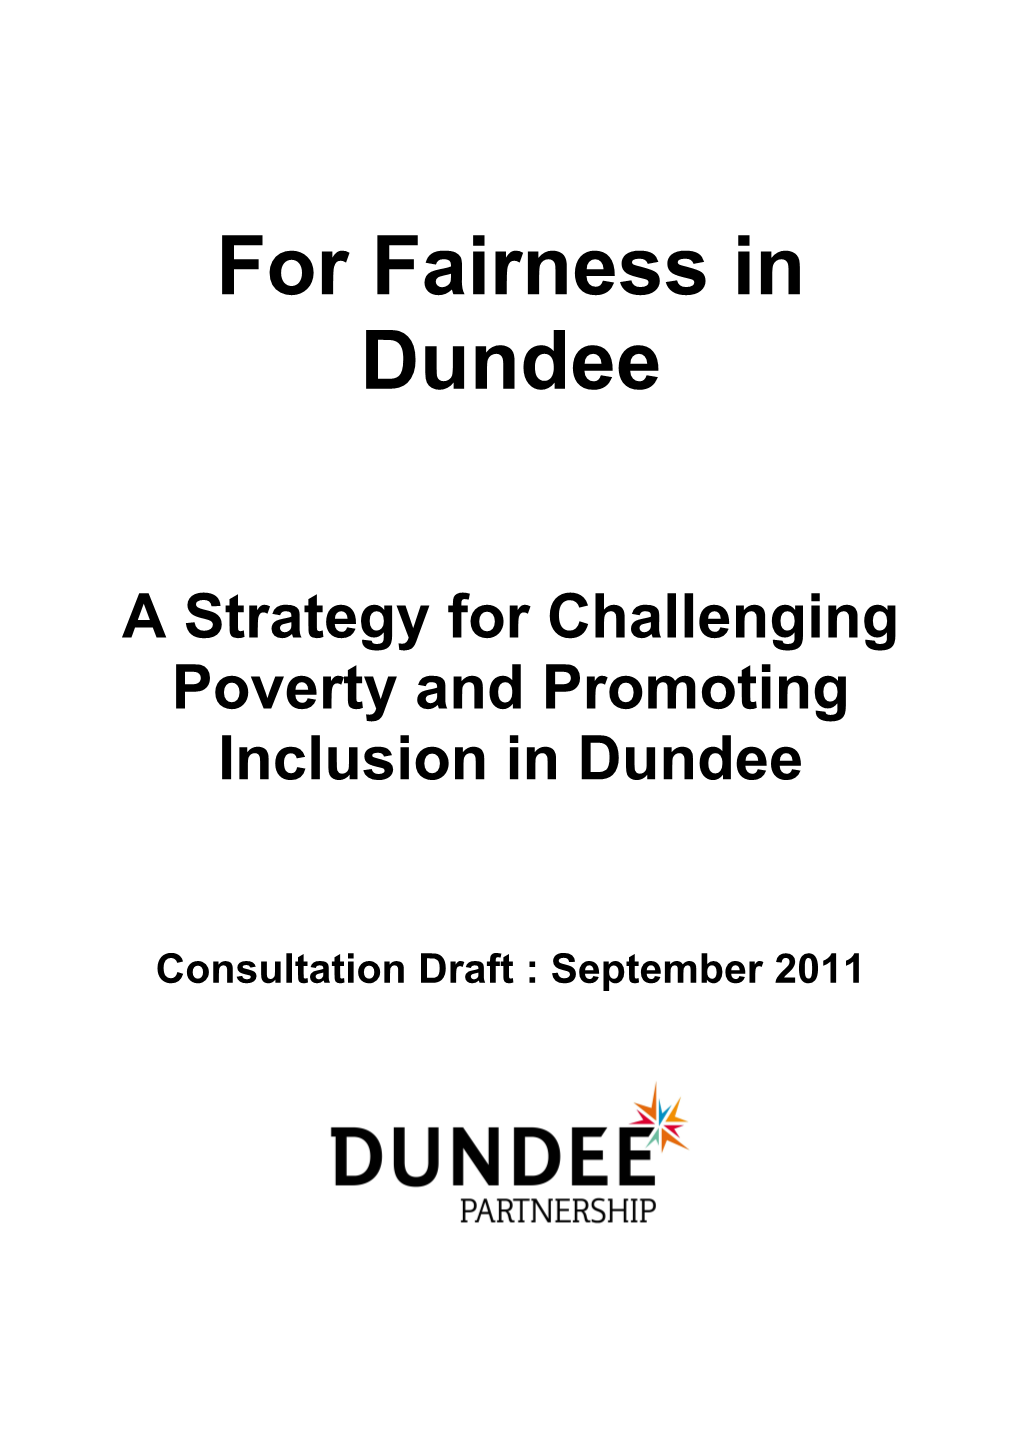 A Strategy for Challenging Poverty and Promoting Inclusion in Dundee